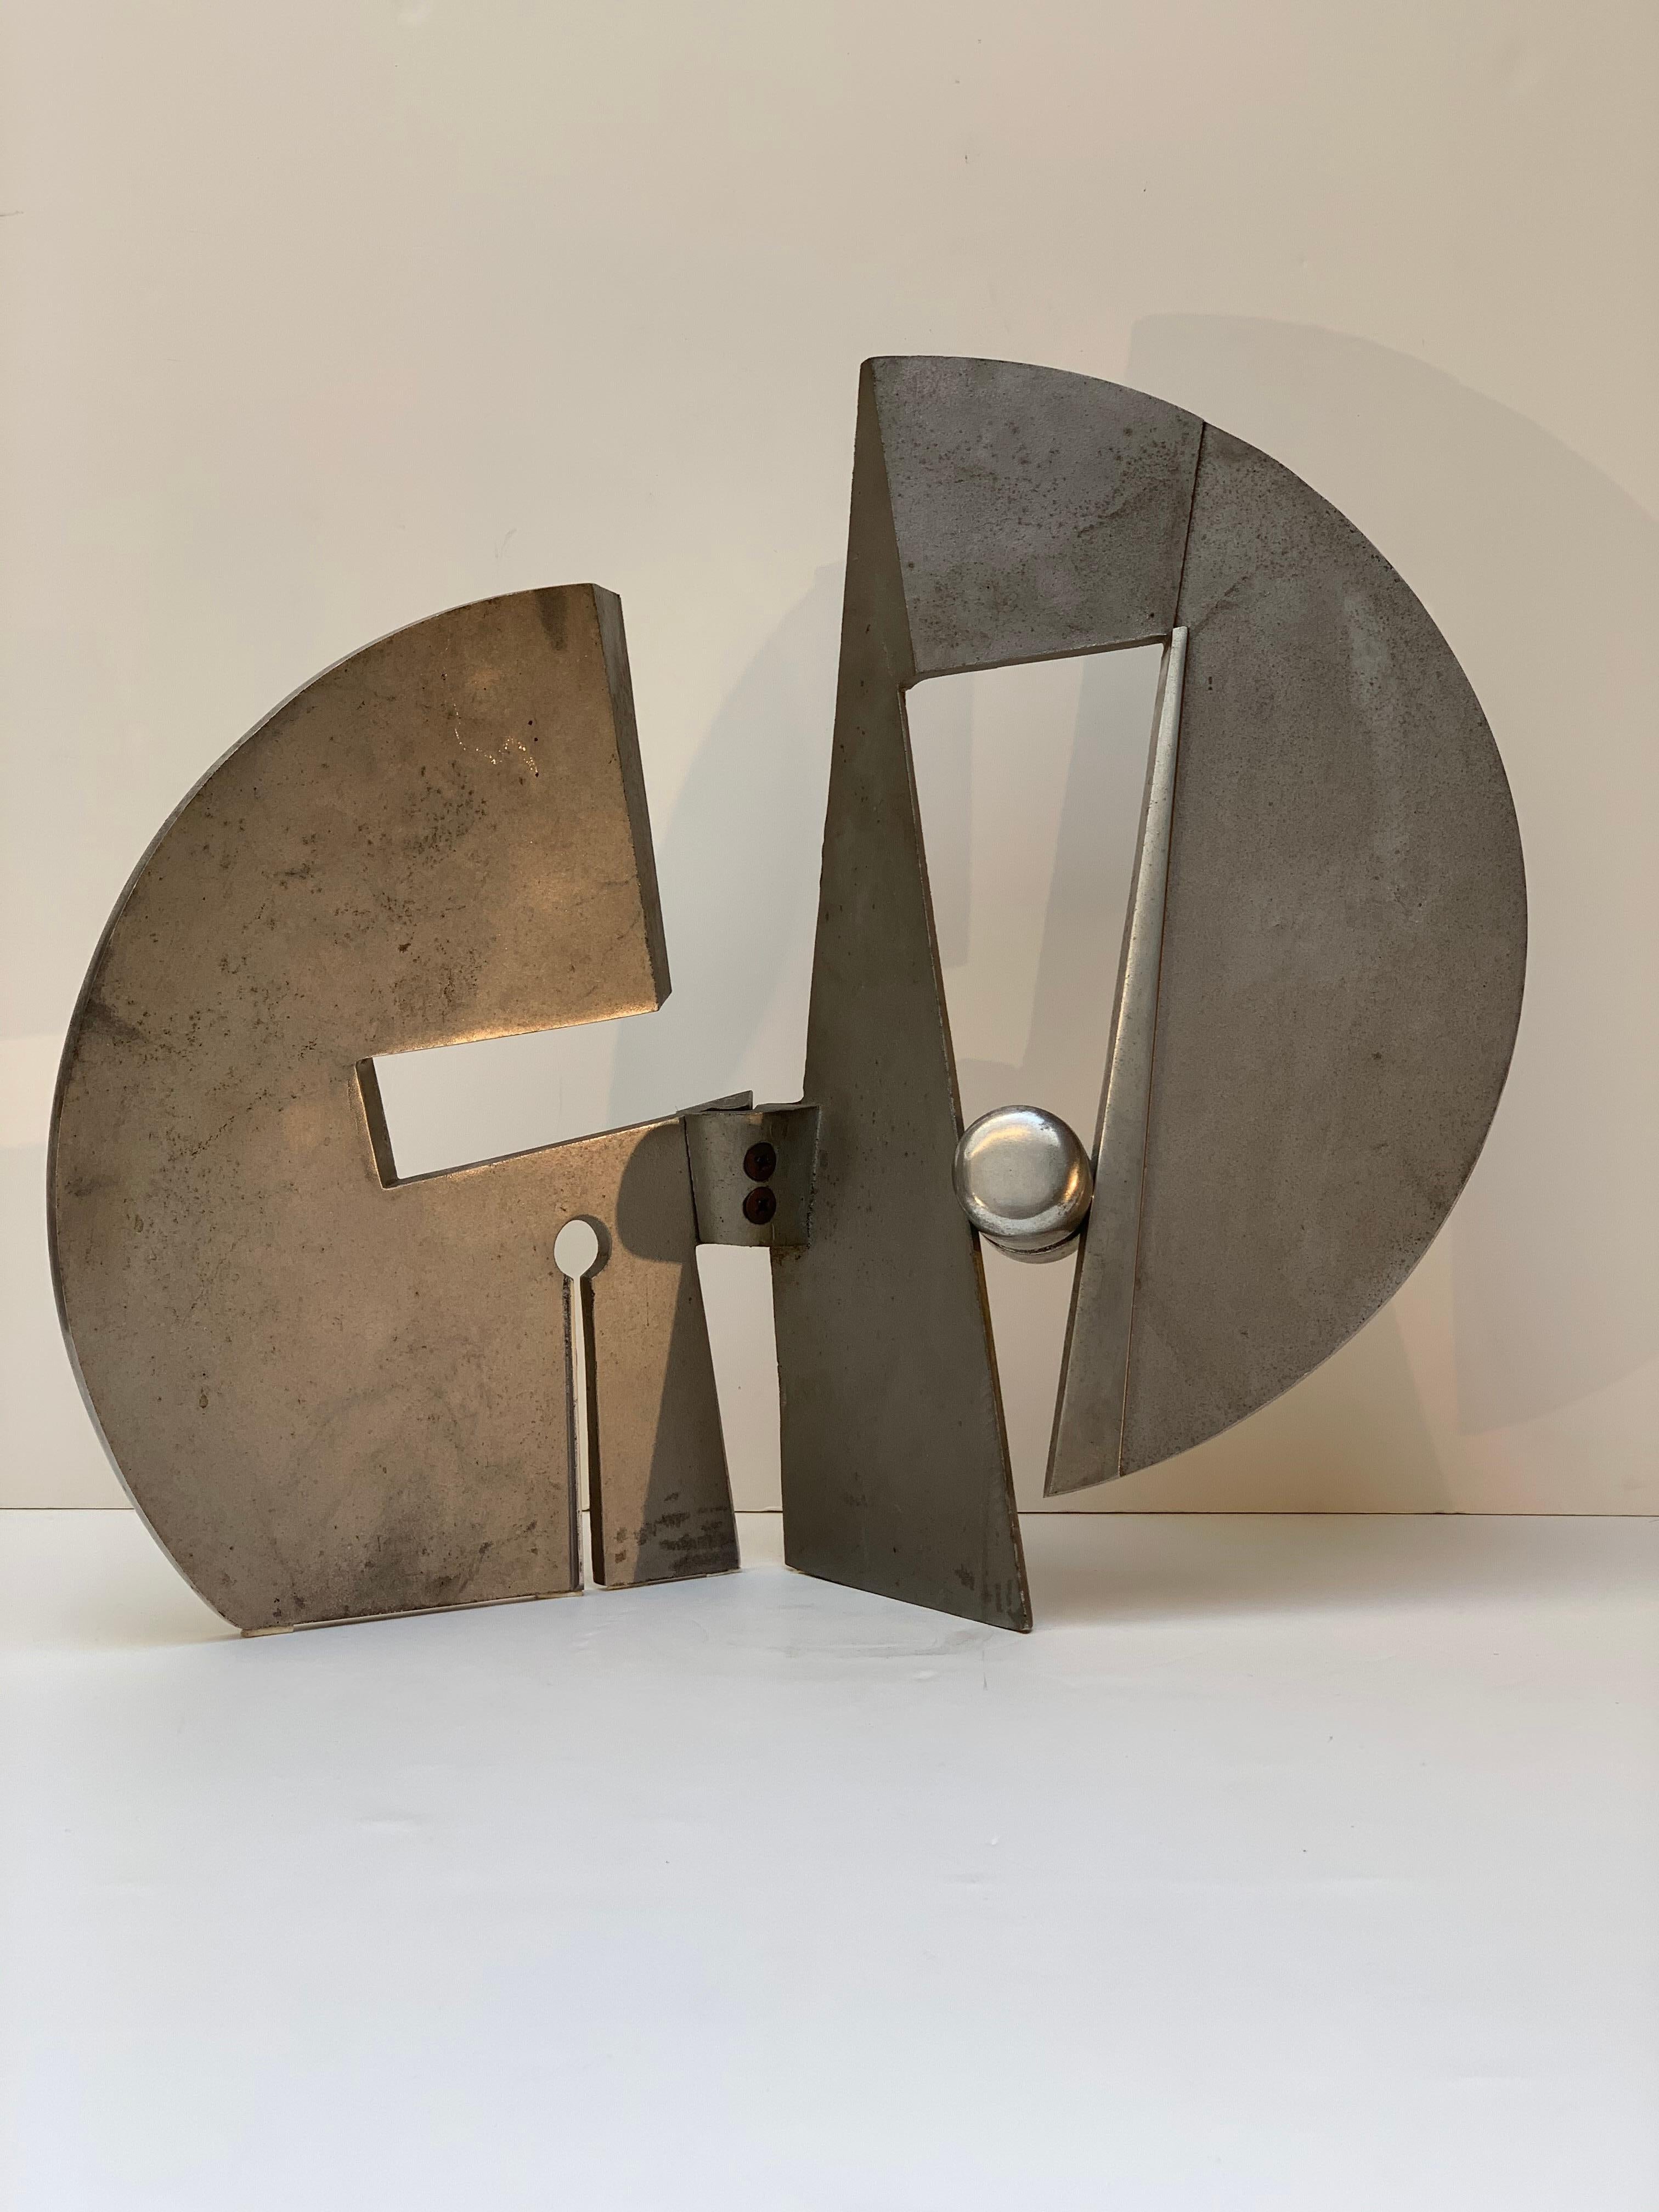 Abstract sculpture in aluminum signed by Nero and Patuzzi NP2 for forms and surfaces midcentury 1970 about this piece used in the exhibitions of the Artistic group NP2 as evidenced by the writing 